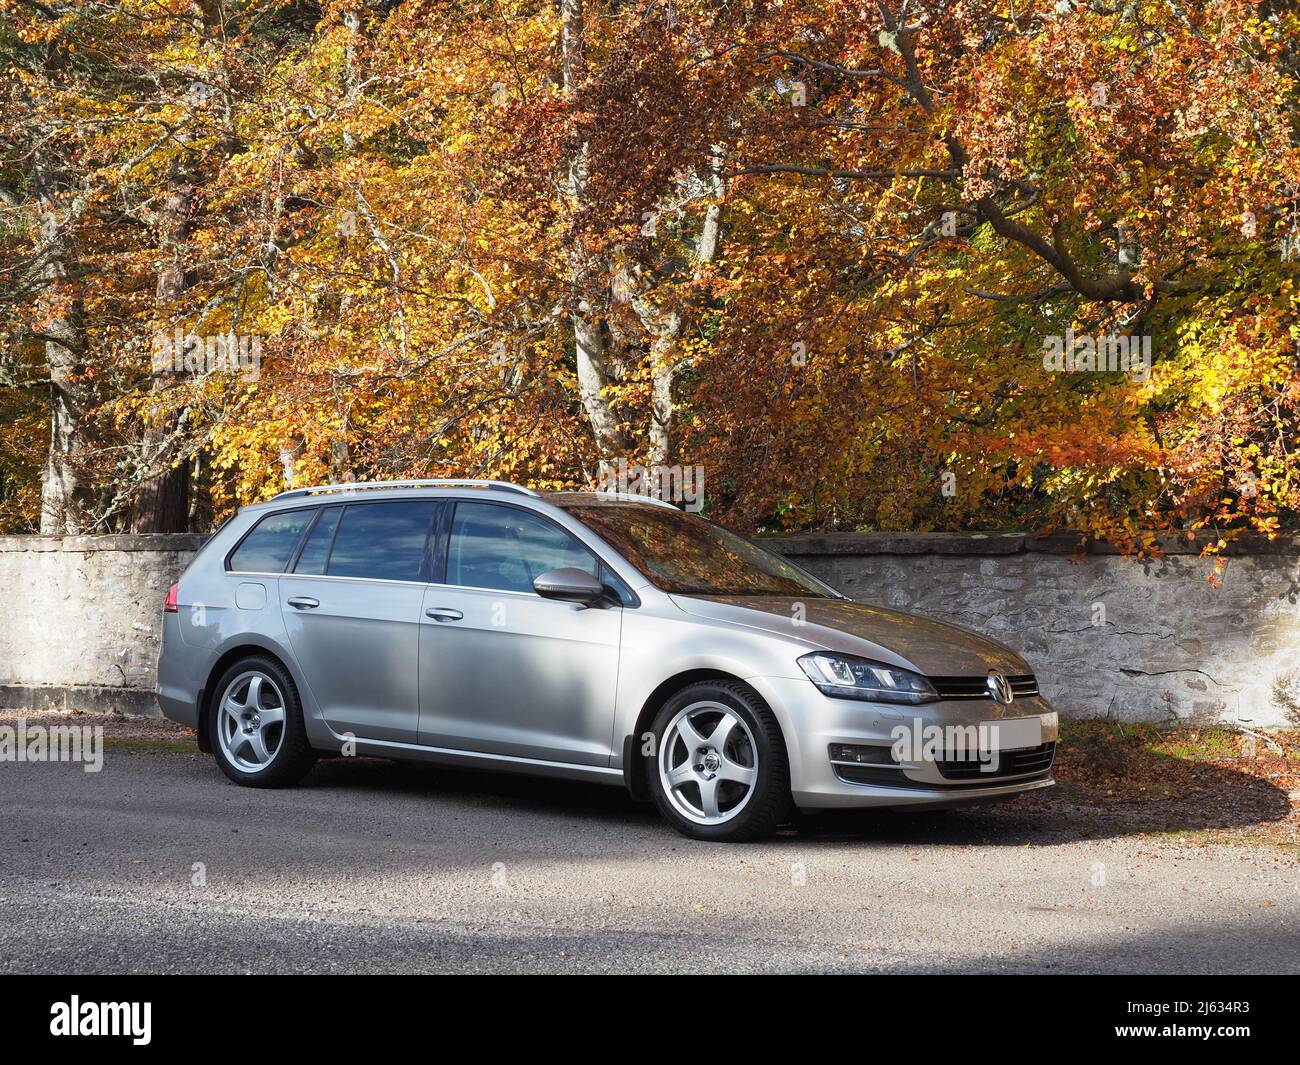 Tungsten silver Volkswagen Golf MK7 estate, variant, Team Dynamics Pro Race 3 Alloys. Trees with leaves in full autumnal colours & an old stone wall. Stock Photo